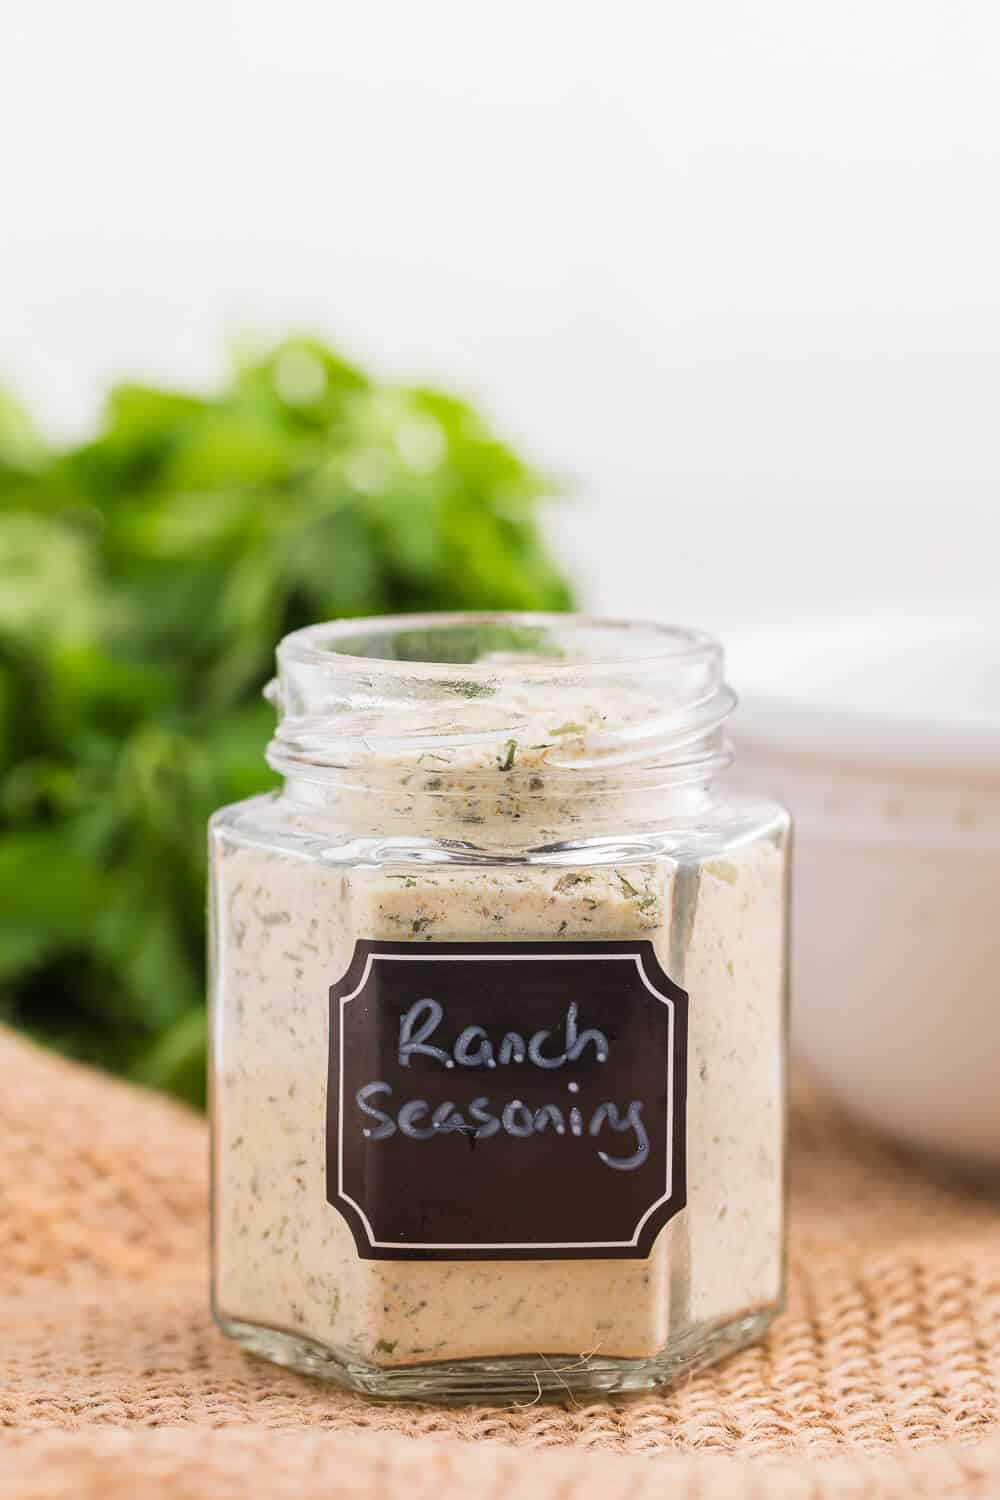 Ranch seasoning in a spice jar with a black label.